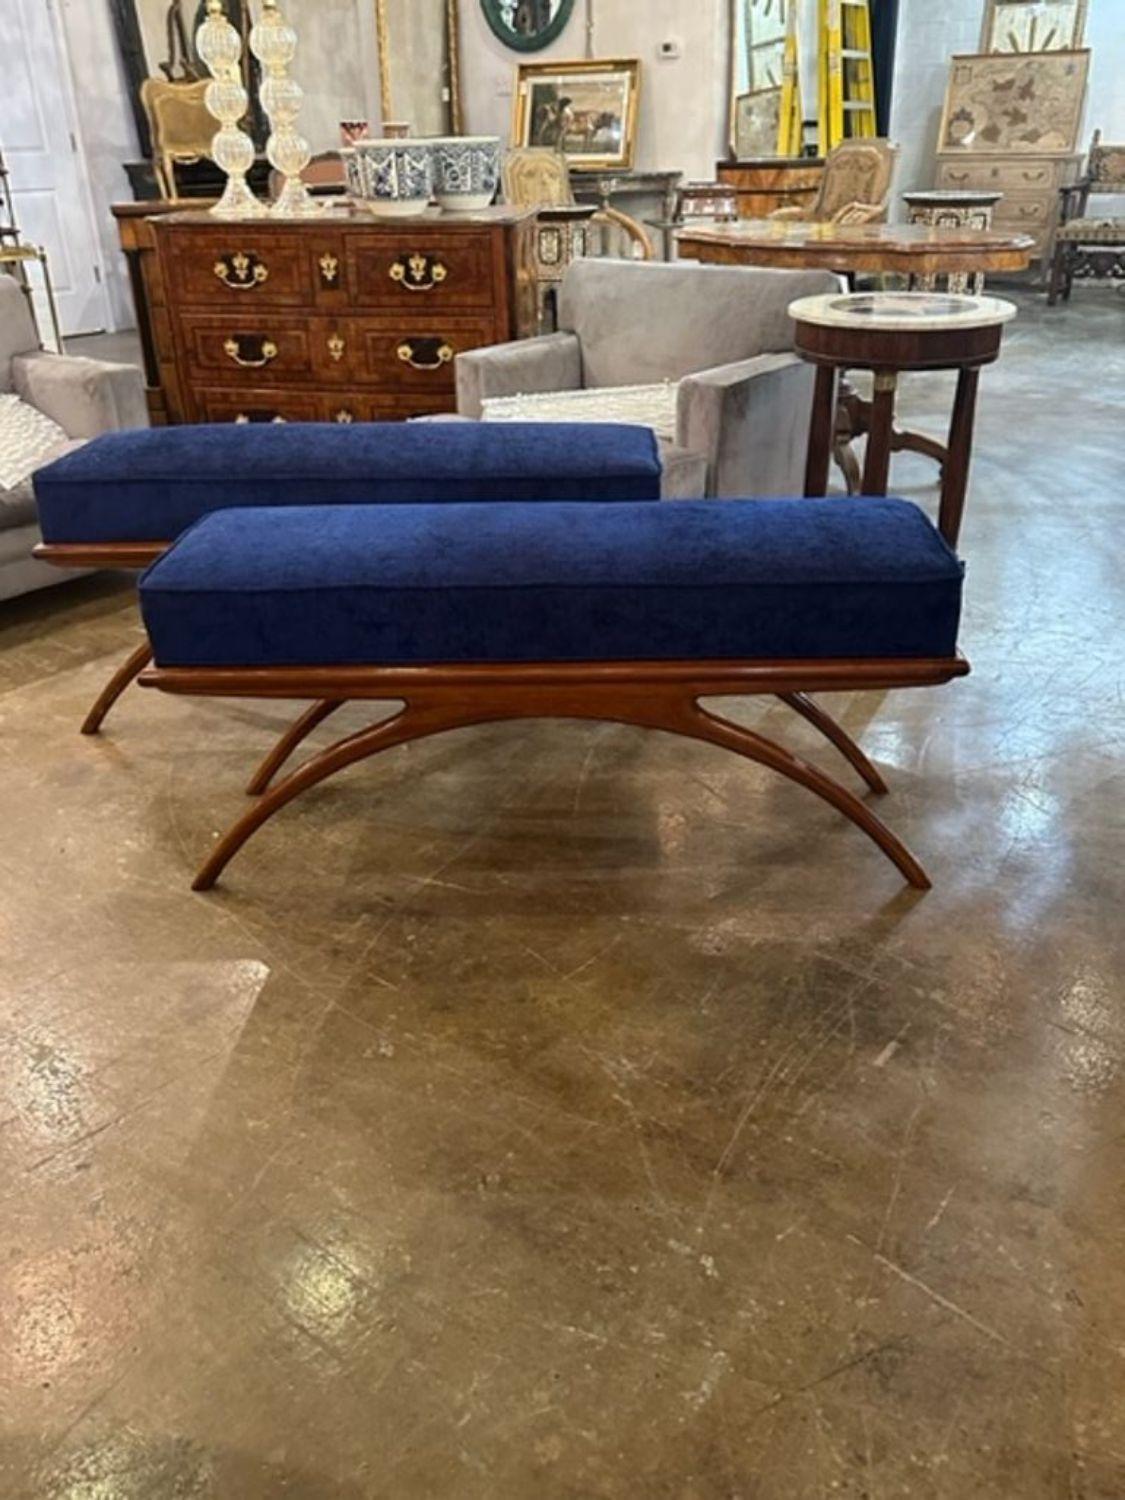 Handsome MCM style mahogany benches upholstered in a blue fabric. Nice clean lines and good quality.  Note: These are priced per item.